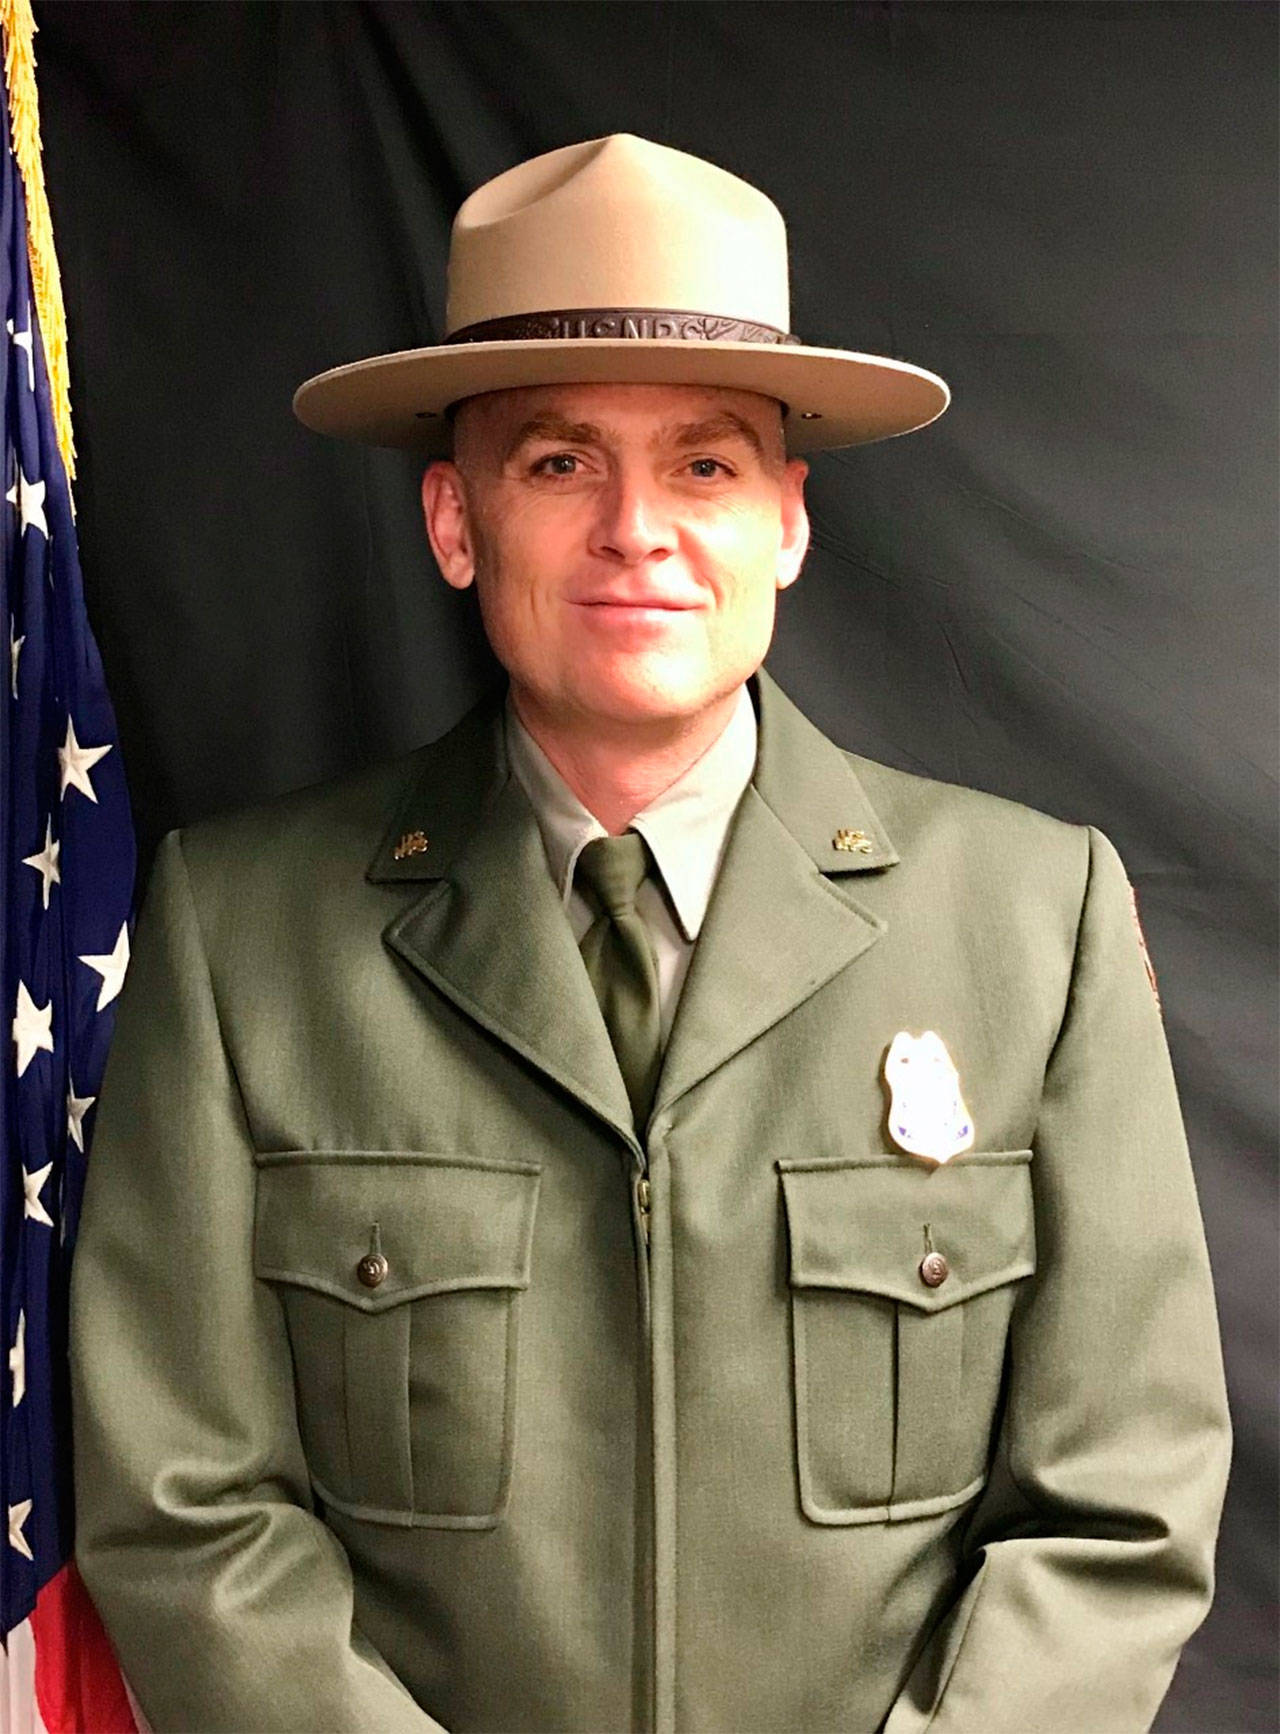 Scott Jacobs is the new Chief Ranger at Olympic National Park, park officials announced this week. Jacobs’ first day was Nov. 16. Photo courtesy of National Park Service